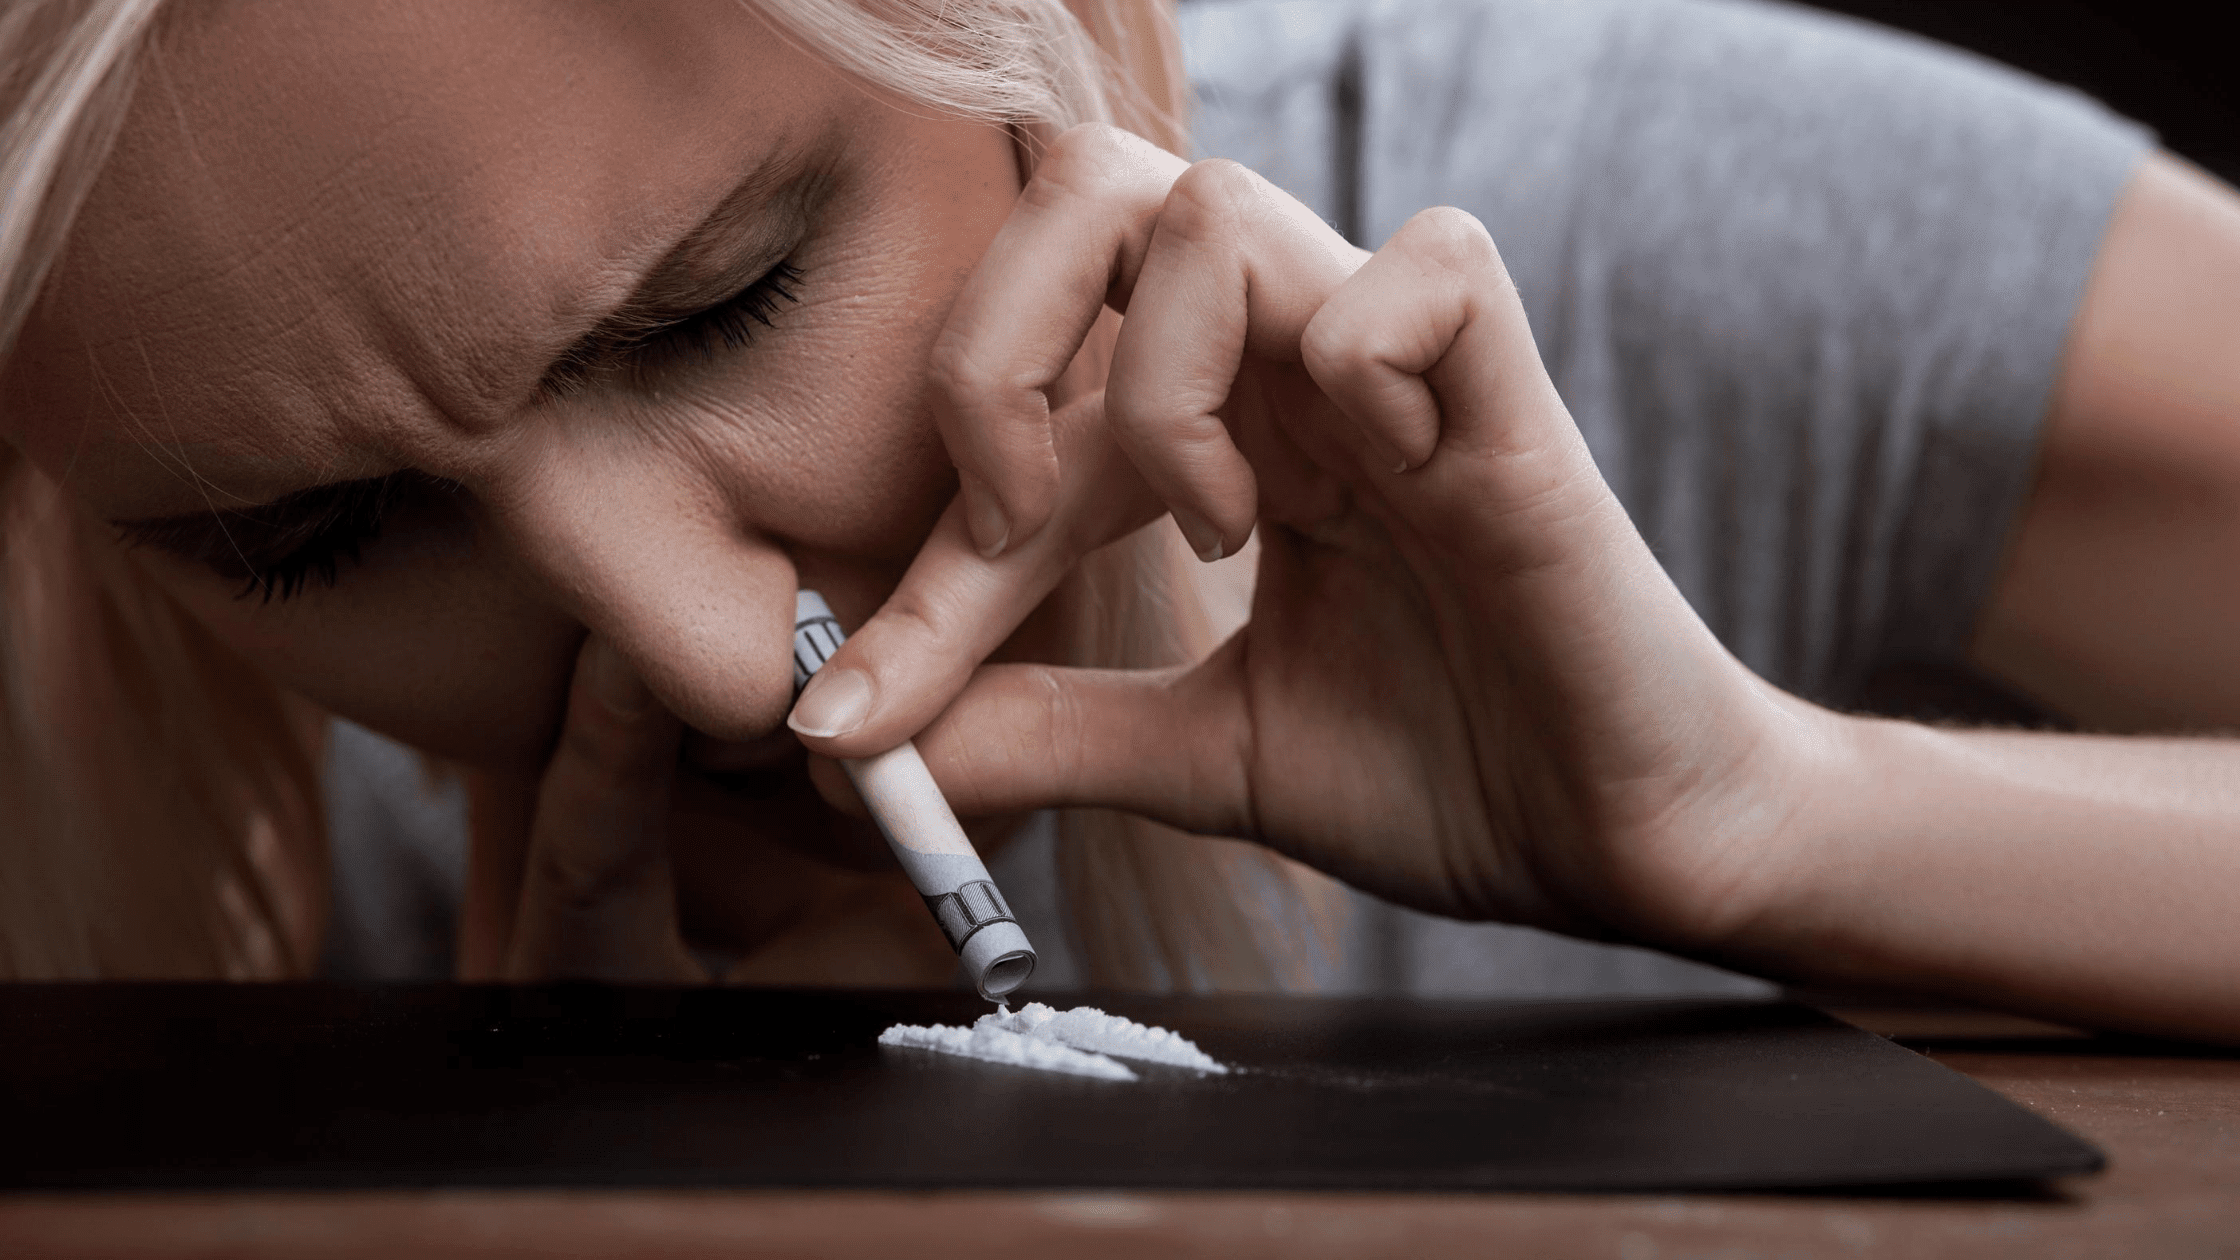 blonde woman abusing cocaine by snorting it up her nose with a rolled up hundred dollar bill